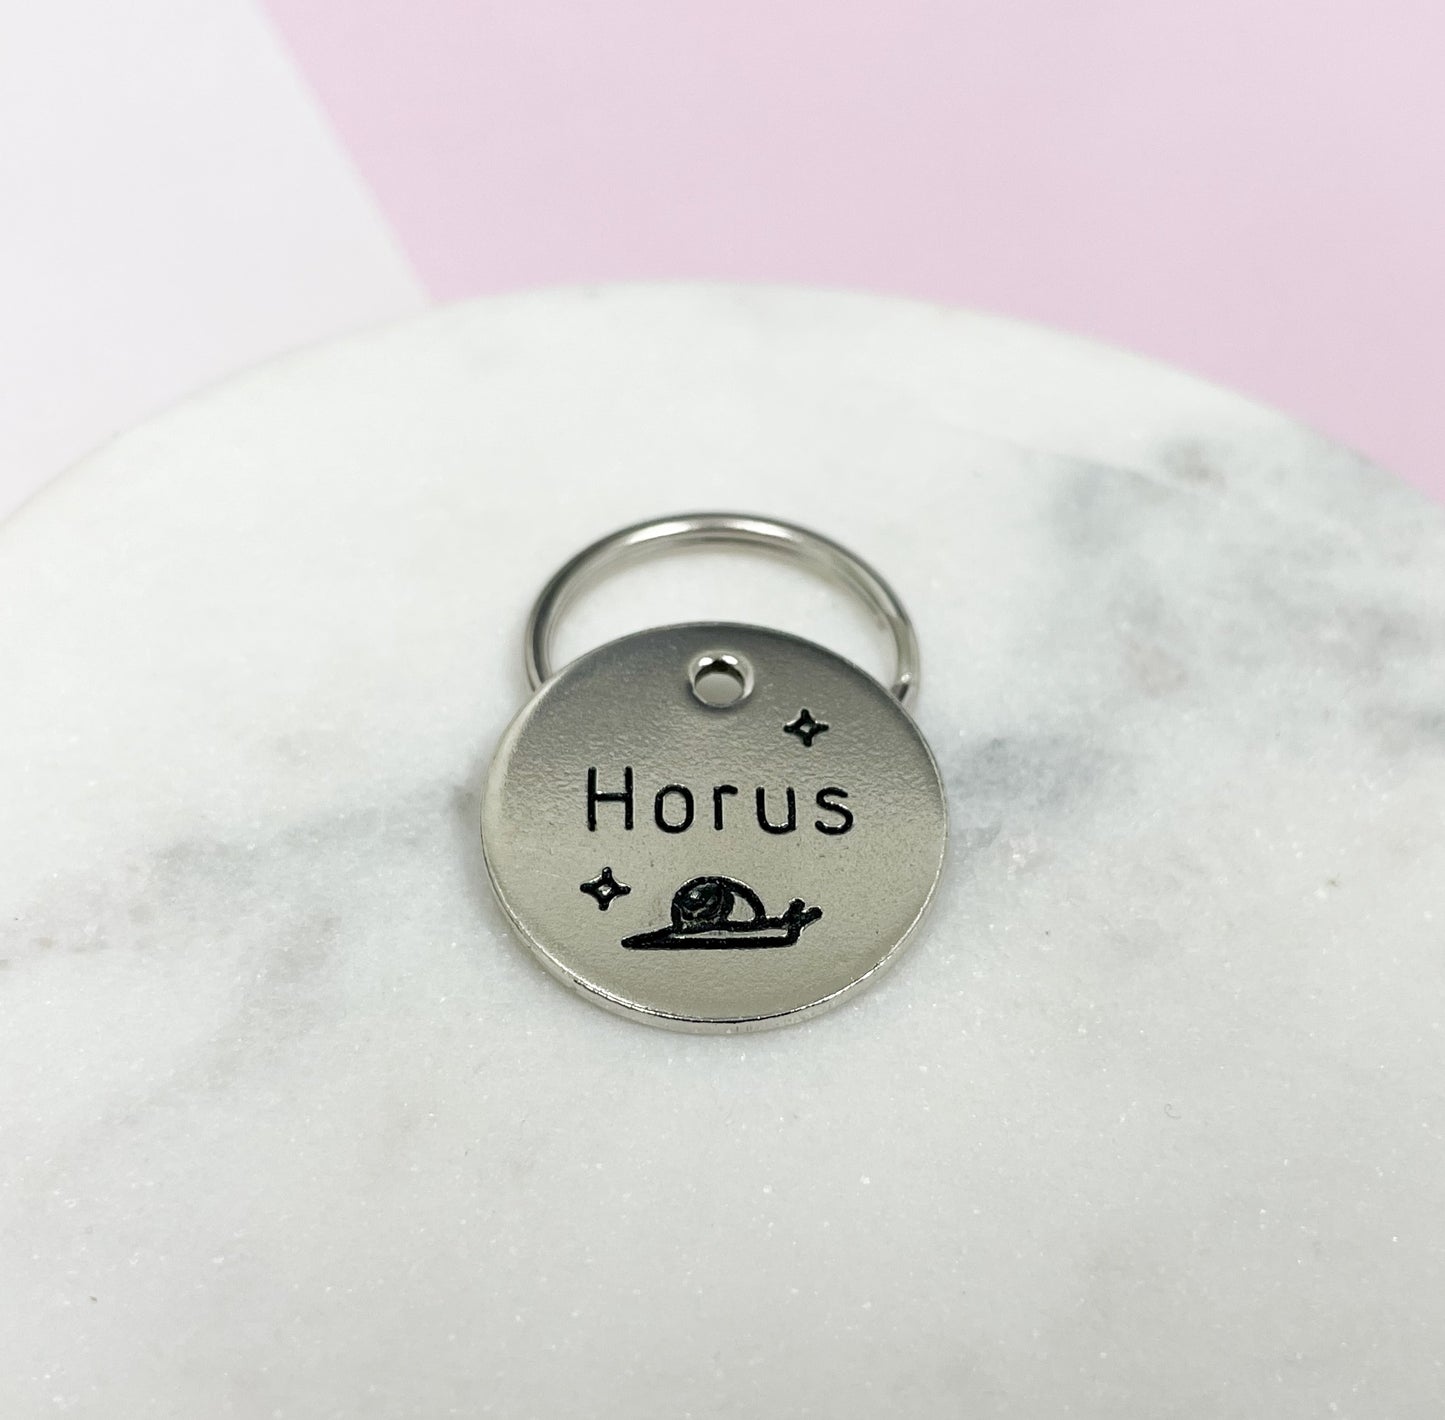 Personalized Dog Tag - Snail Design Engraved Dog Tag - Bug Design Tag - Cat ID Tag - Dog Collar Tag - Custom Dog Tag - Personalized Tag - Pet ID Tag - Pet Name Tag - Nature  - 